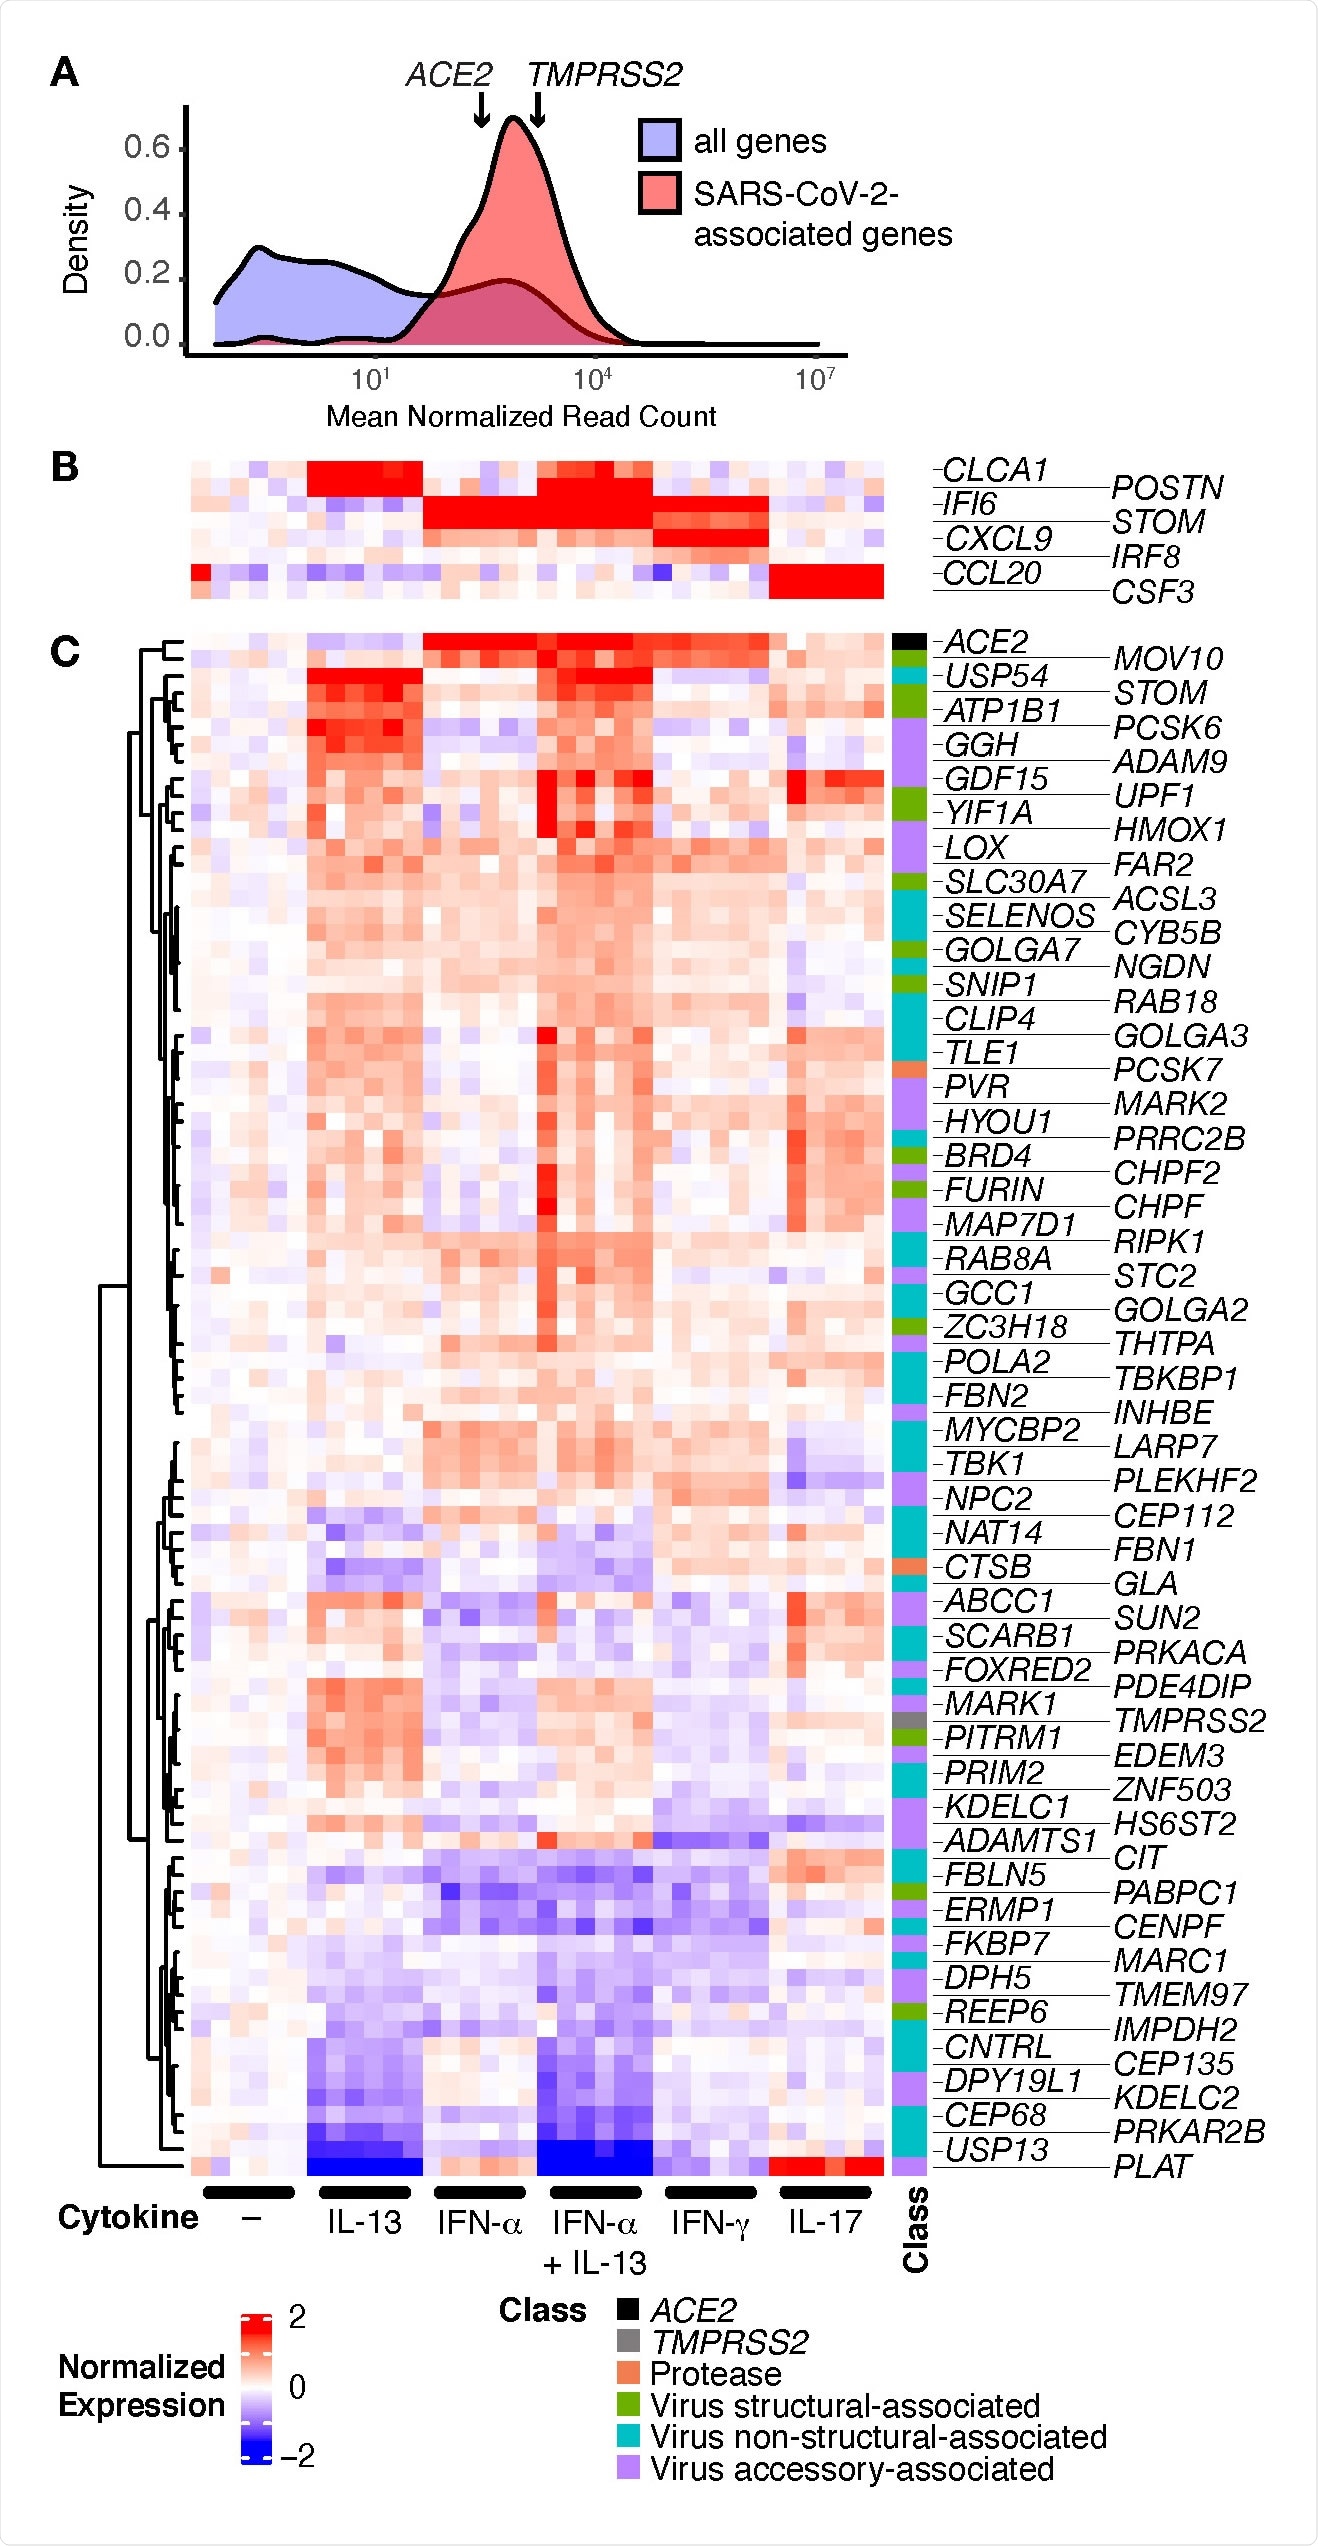 SARS-CoV-2-associated genes are highly expressed in HBECs and many are regulated by cytokines. HBECs from six donors were cultured without cytokine (–), or with IL 13, IFN-α, a combination of IL-13 and IFN-α, IFN-γ, or IL-17 and analyzed by RNA-seq. (A) Comparison of read counts between SARS-CoV-2 associated genes, including ACE2 and TMPRSS2, and all detected genes (≥1 read per million mapped reads in ≥50% of samples) in unstimulated HBECs. (B, C) Heatmap illustrating canonical cytokine-regulated genes (B), and cytokine regulated SARS-CoV-2-associated genes (C; FDR q ≤ 0.05; absolute fold change ≥ 1.5 for any cytokine).